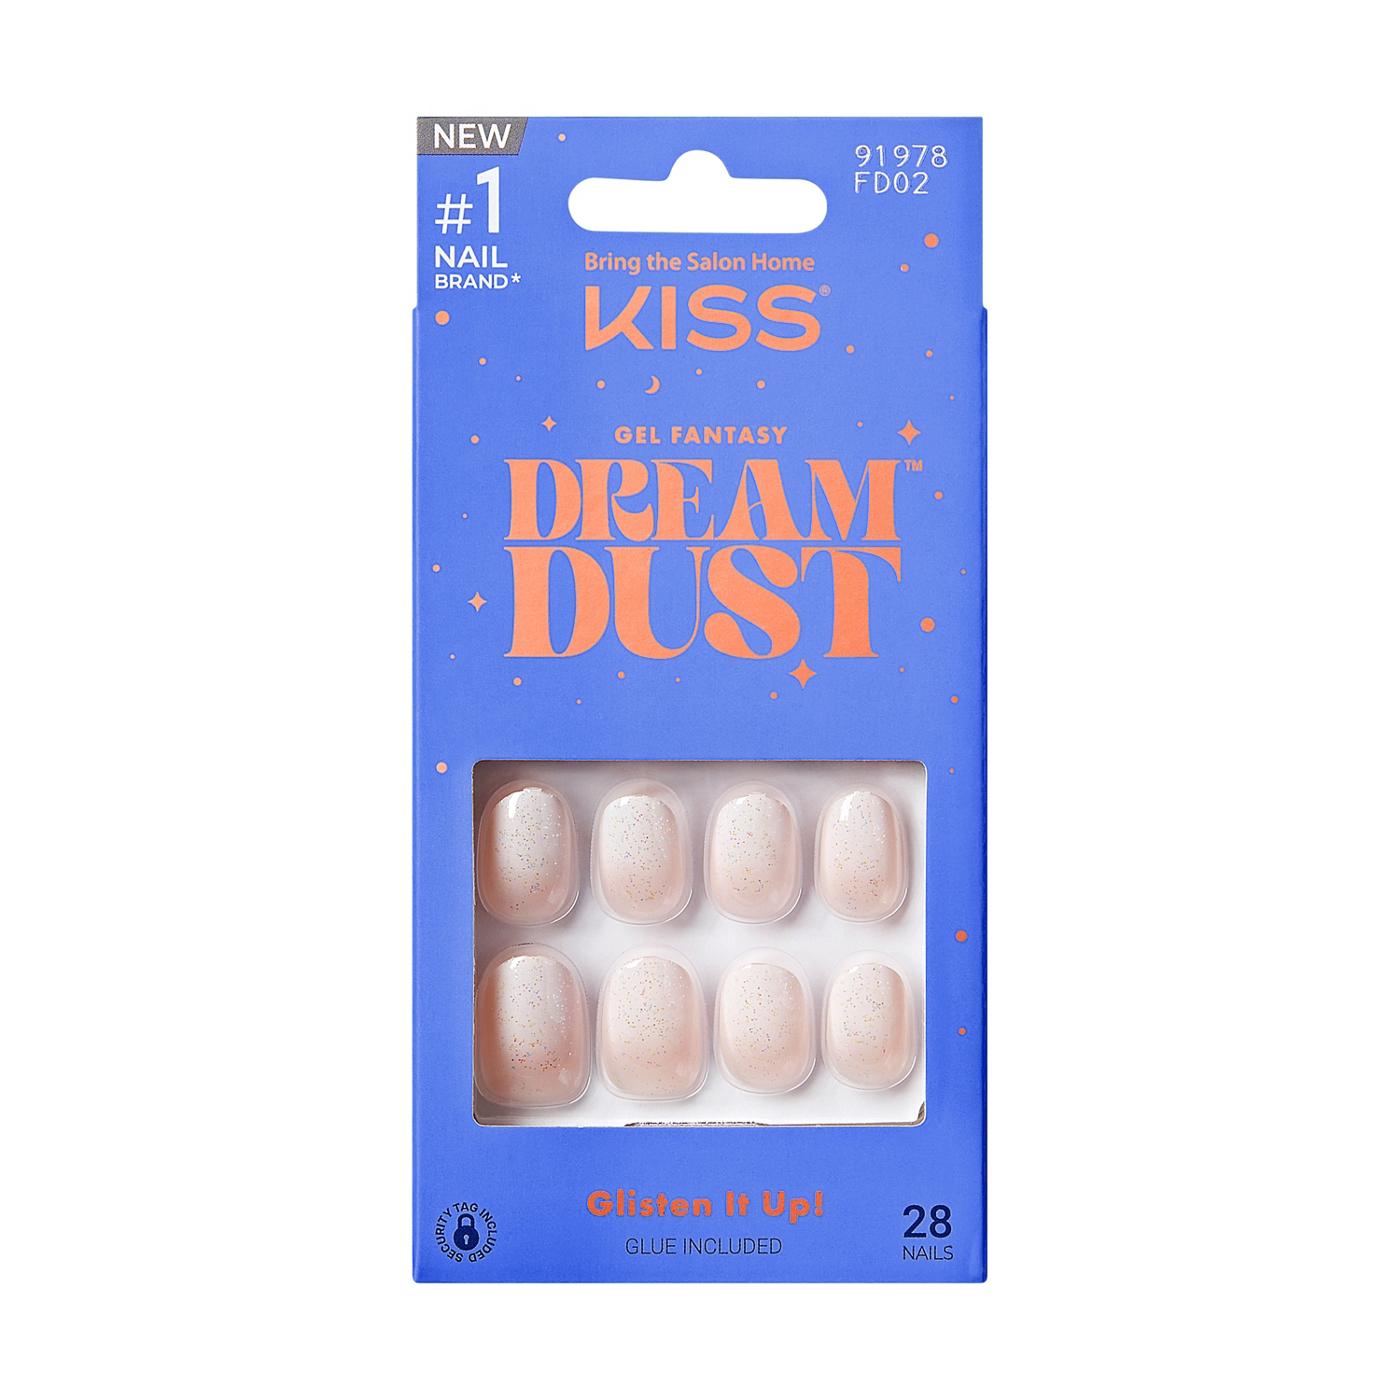 KISS Gel Fantasy Dream Dust Nails - Silver Spoon; image 1 of 6